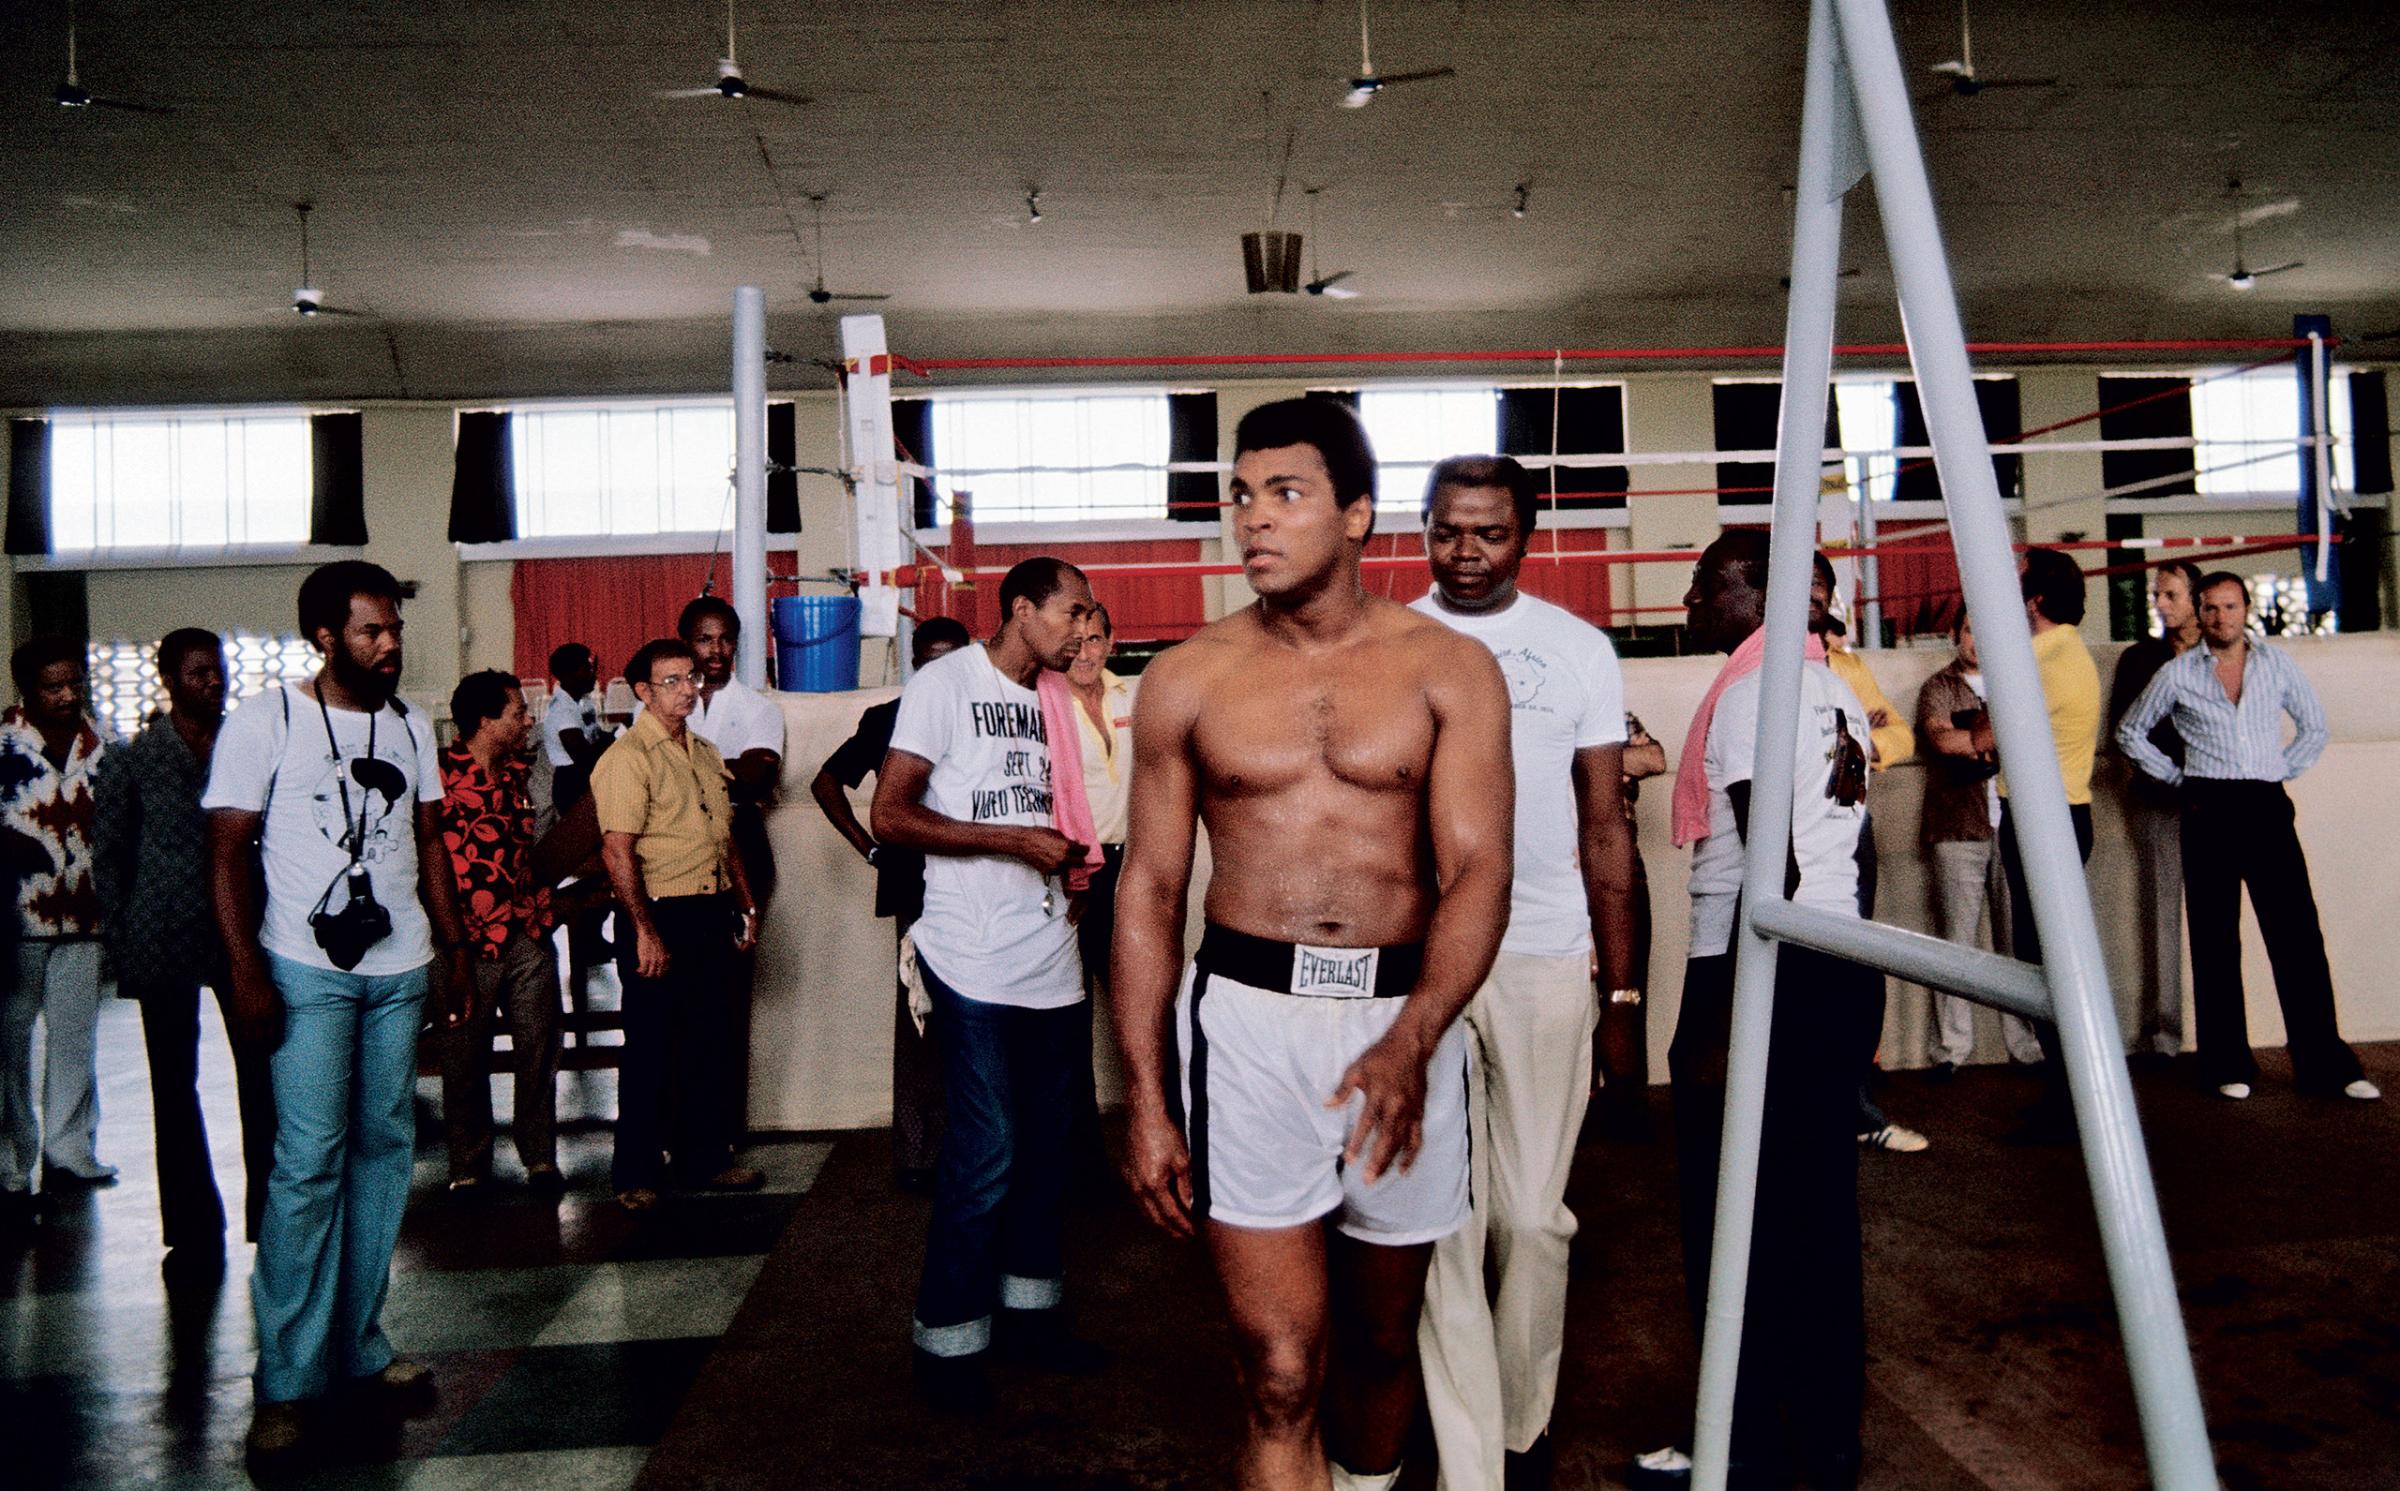 Muhammad Ali and George Foreman in Zaire for The Fight, 1974.